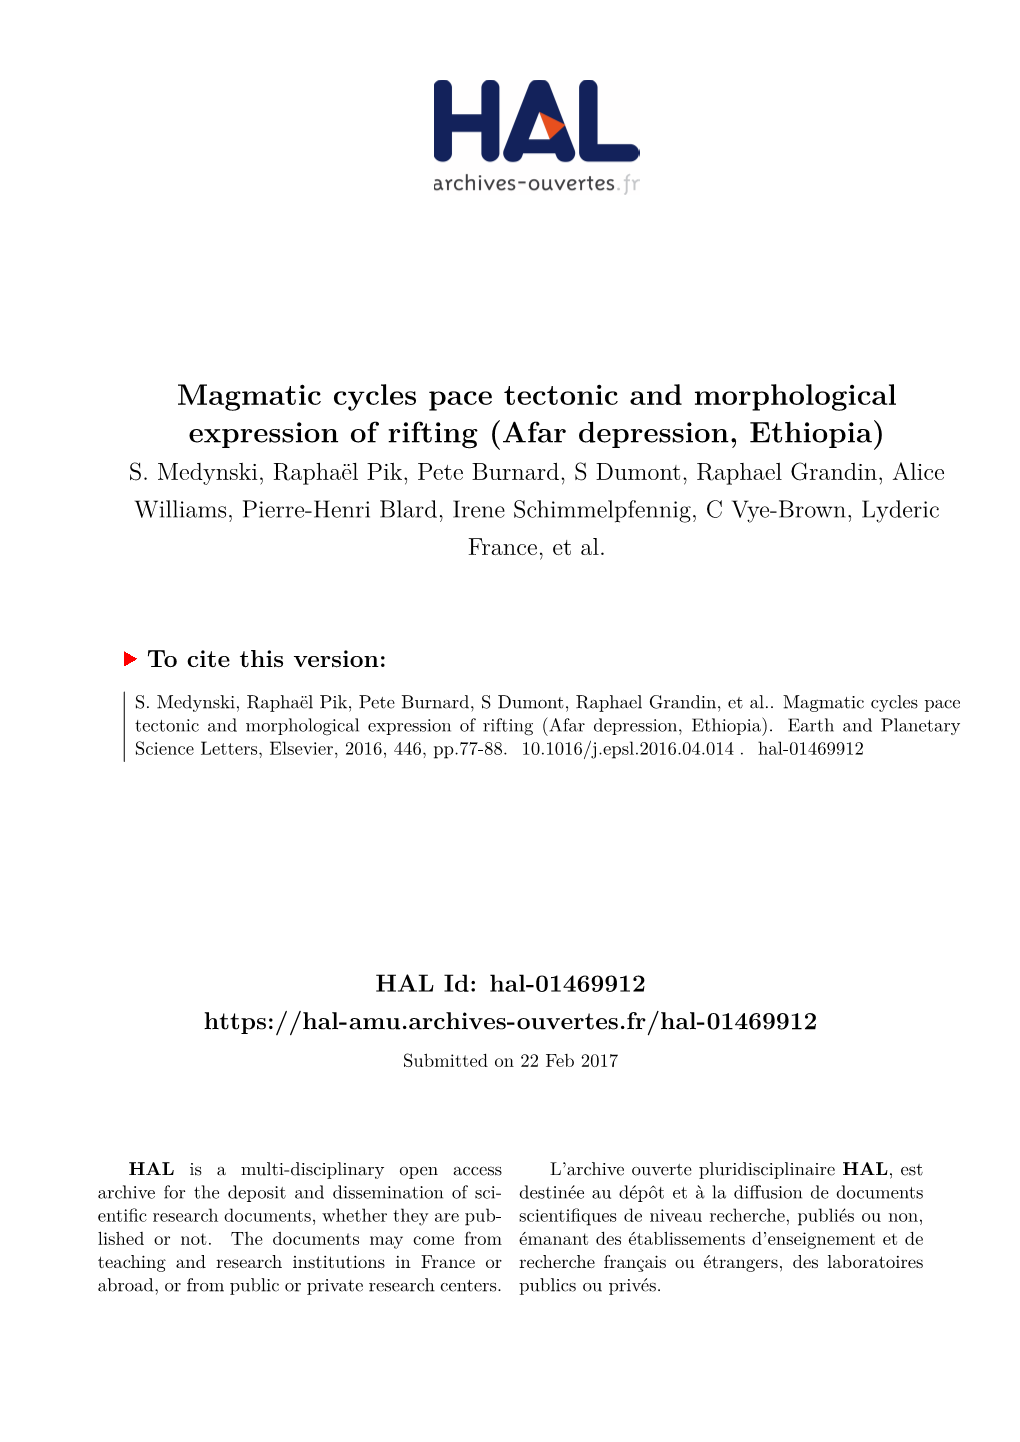 Magmatic Cycles Pace Tectonic and Morphological Expression of Rifting (Afar Depression, Ethiopia) S